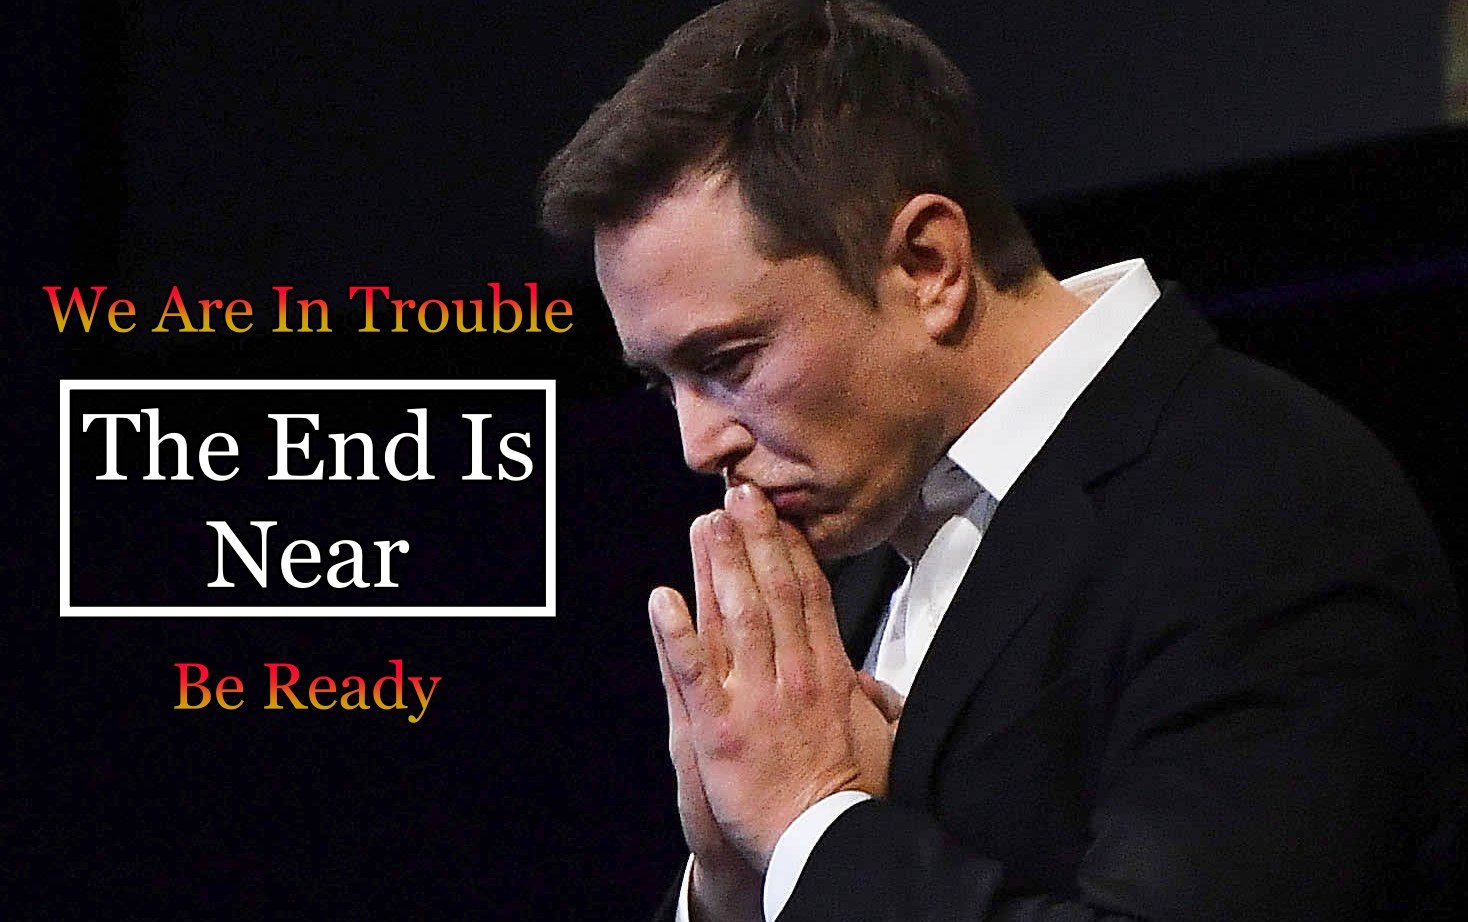 Elon Musk Thinks: The End Is Near, But Why?